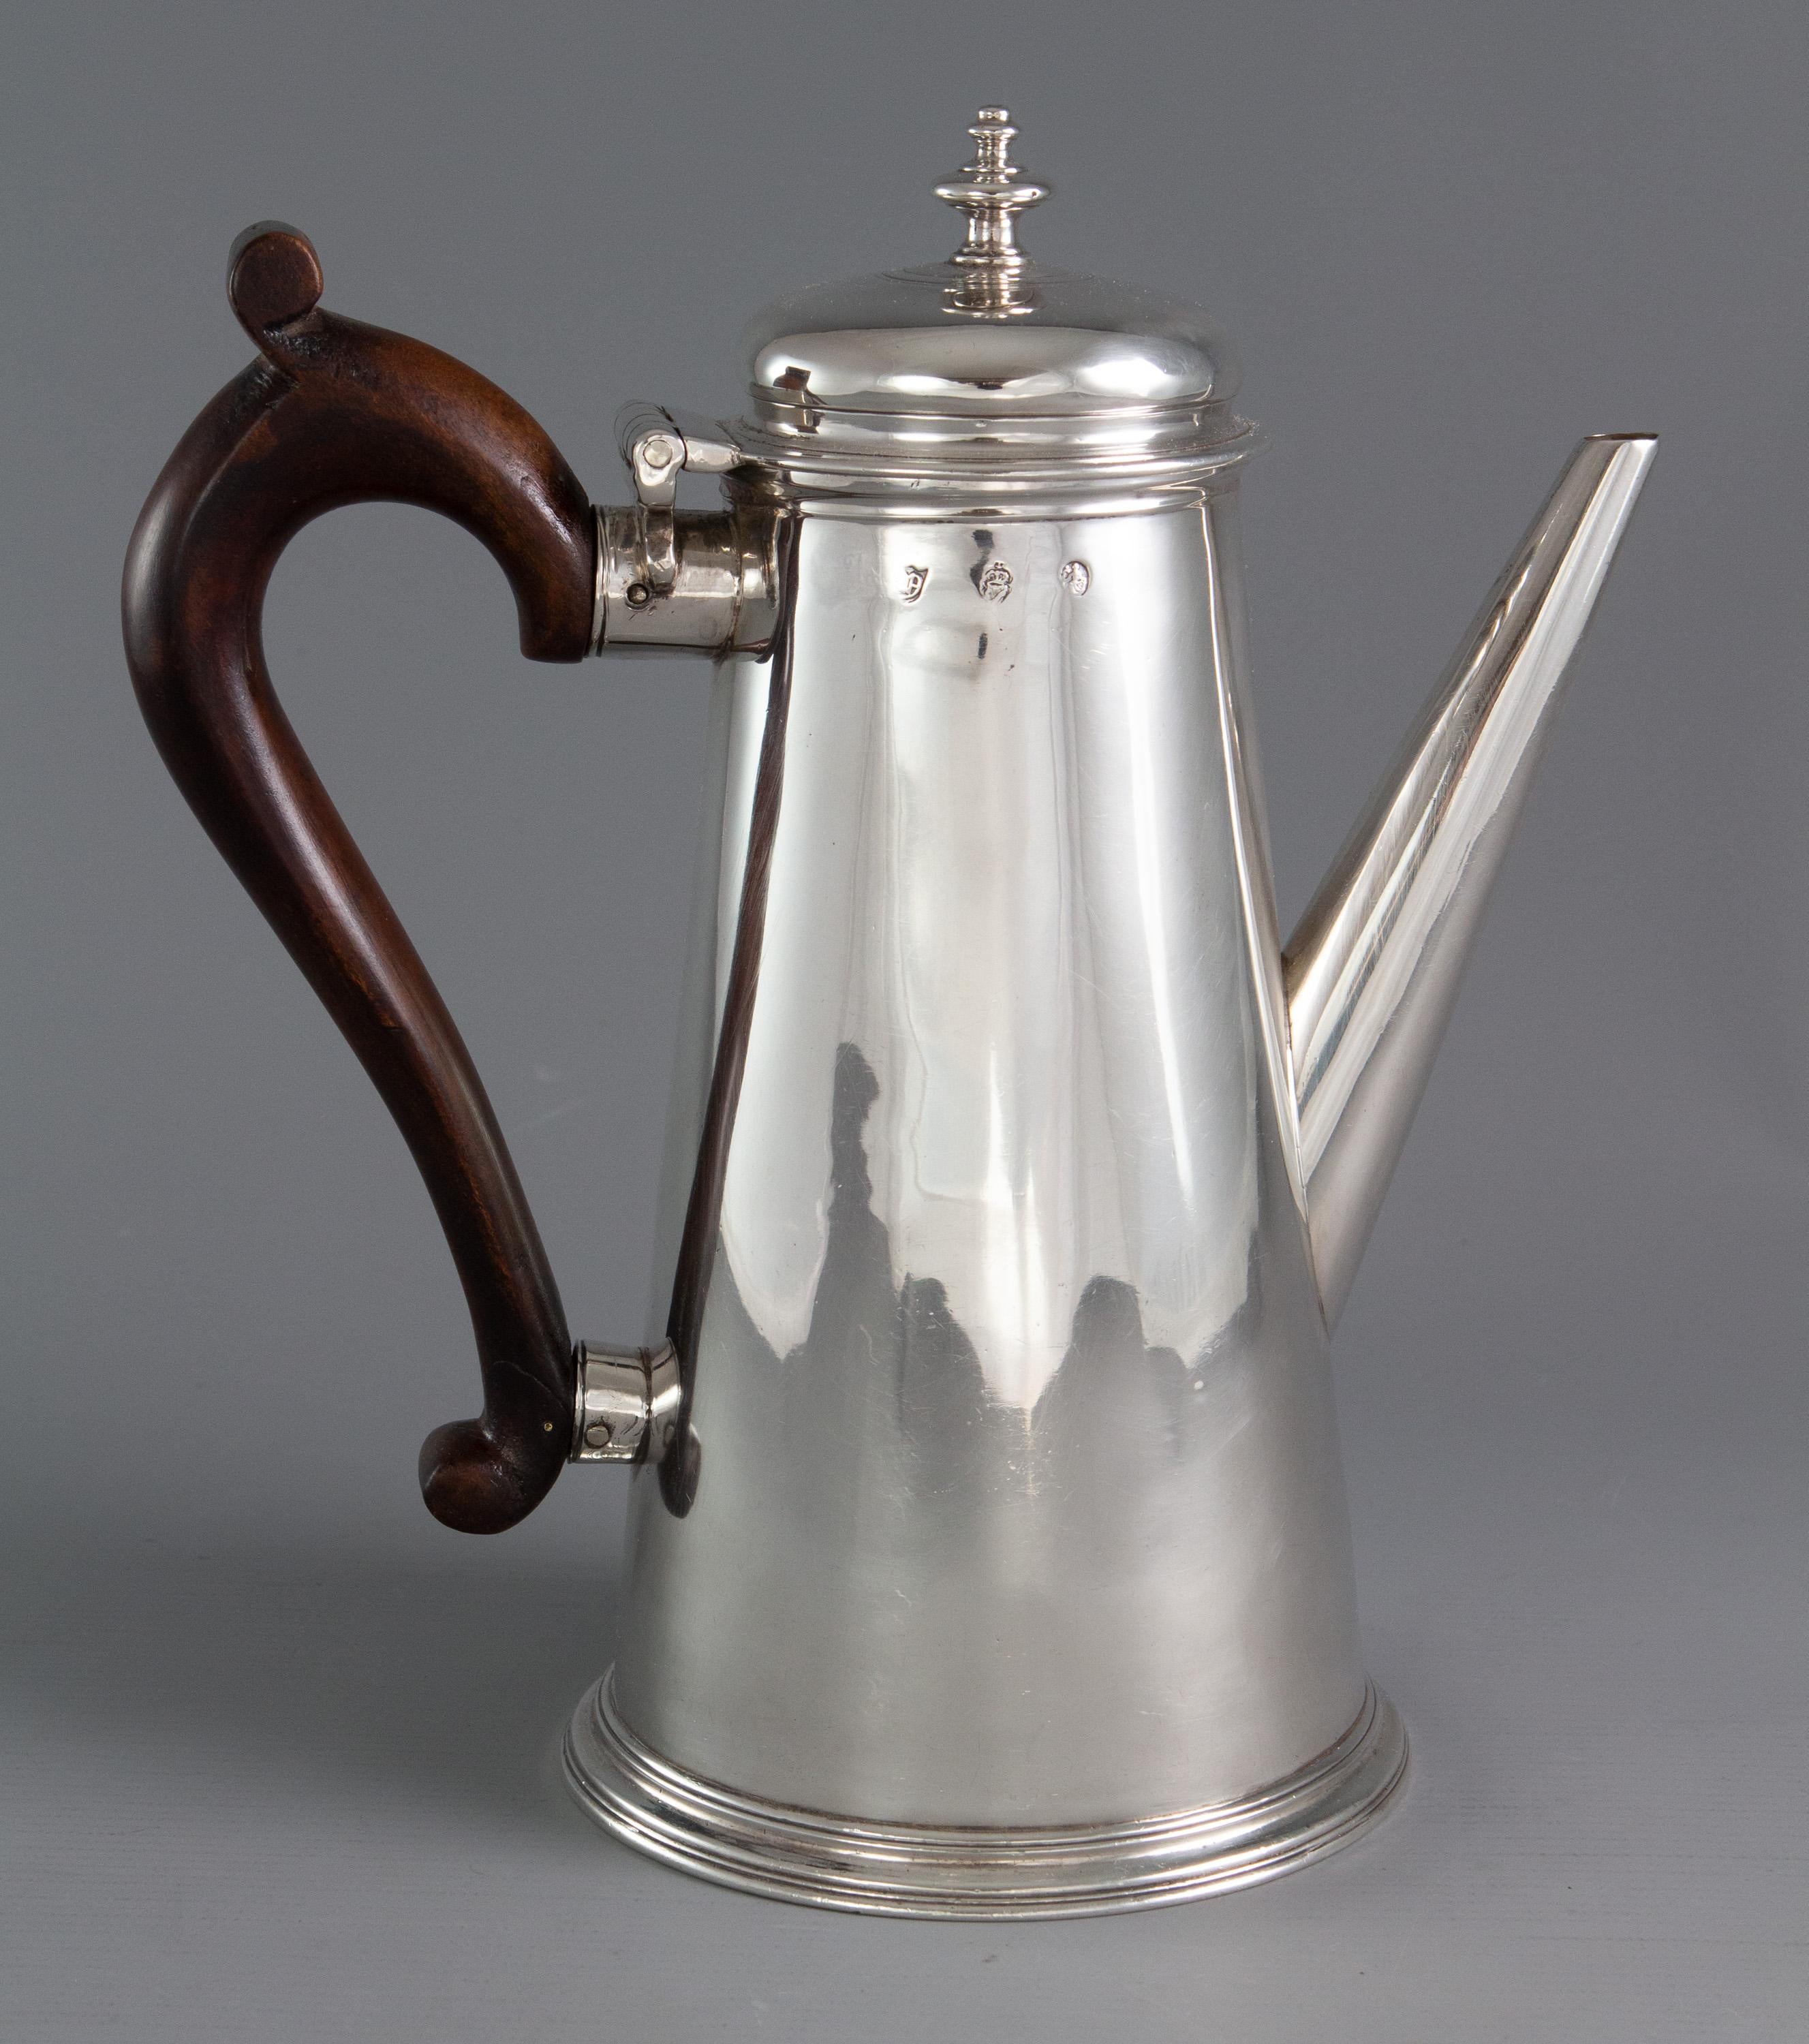 A rare George II Irish silver coffee pot with tapering sides, with a raised domed lid and compressed acorn finial. A tapering straight spout and wooden handle.

Hallmarked for Dublin 1732 by either the Limerick silversmith John Robinson or the